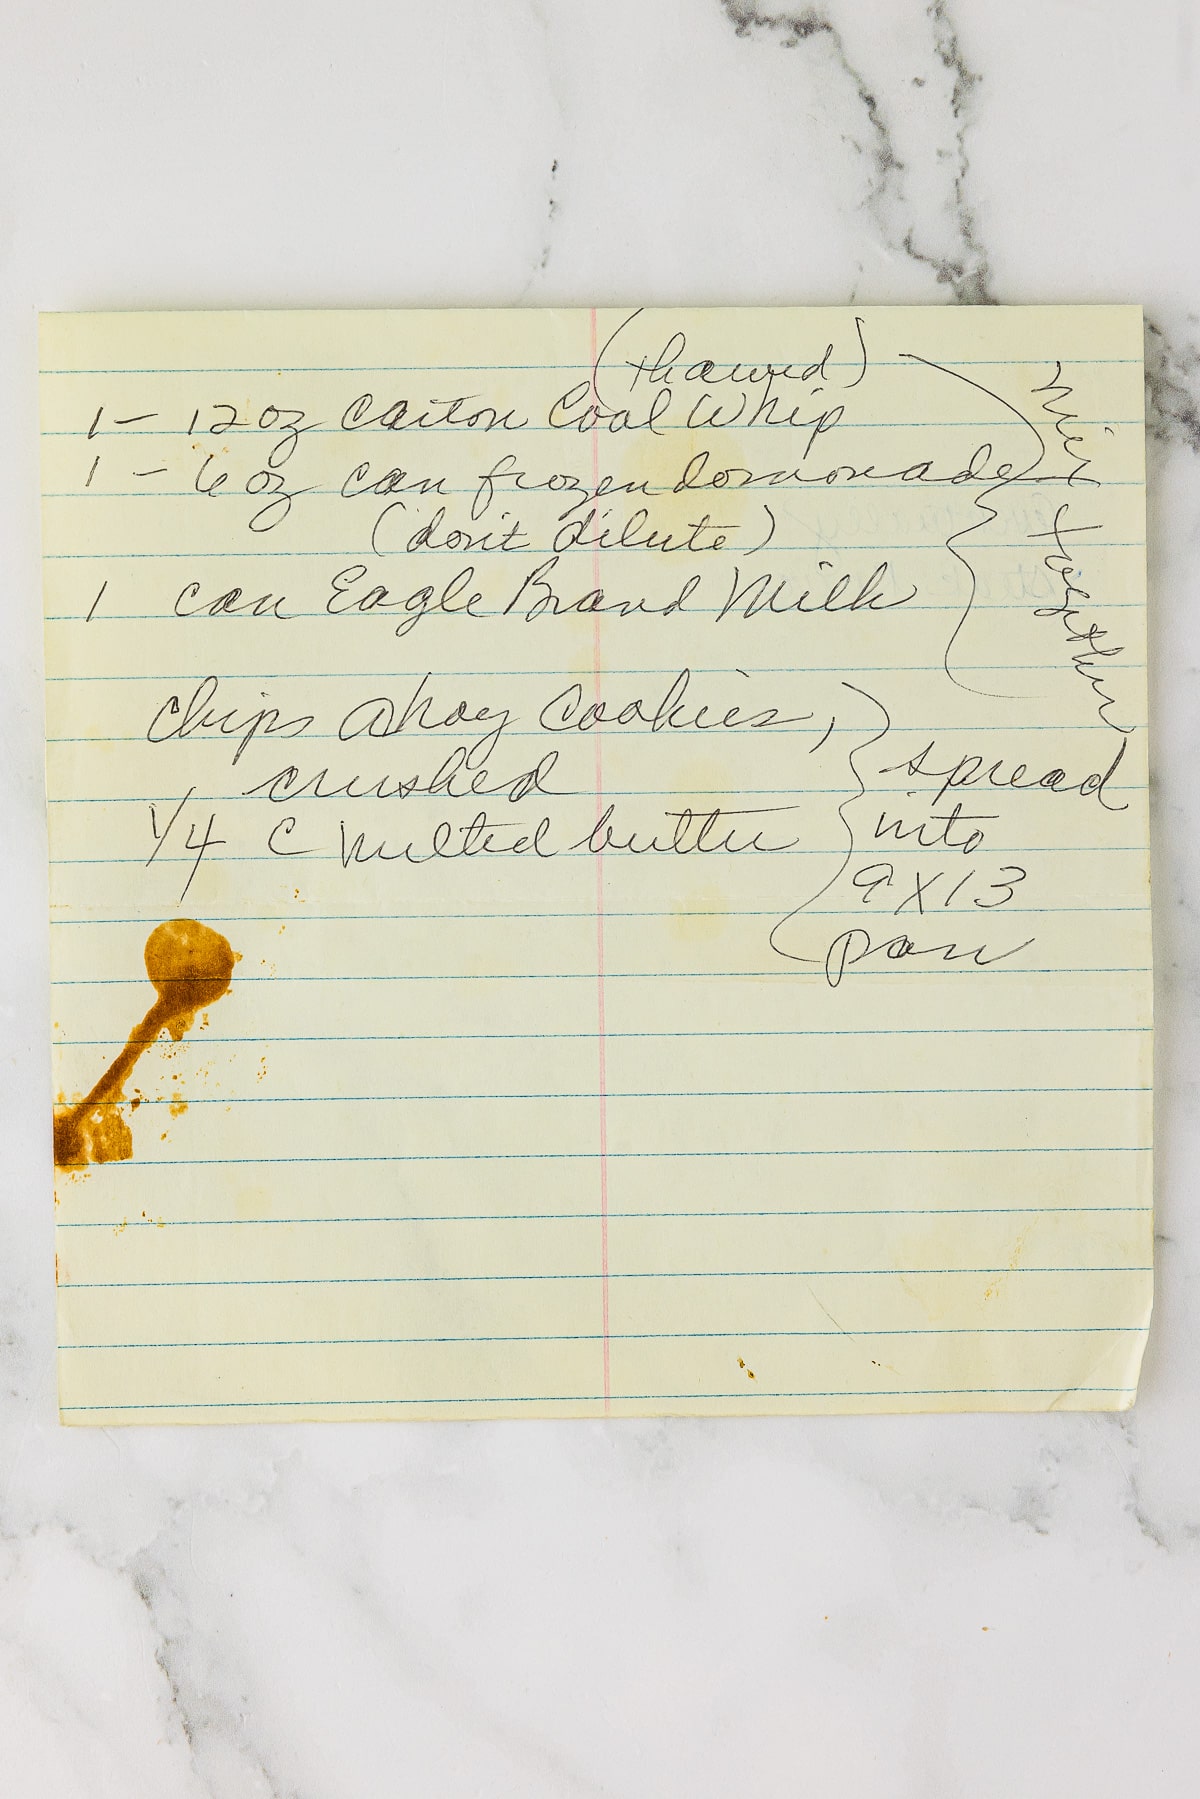 vintage recipe written out by hand on an old piece of yellow lined paper